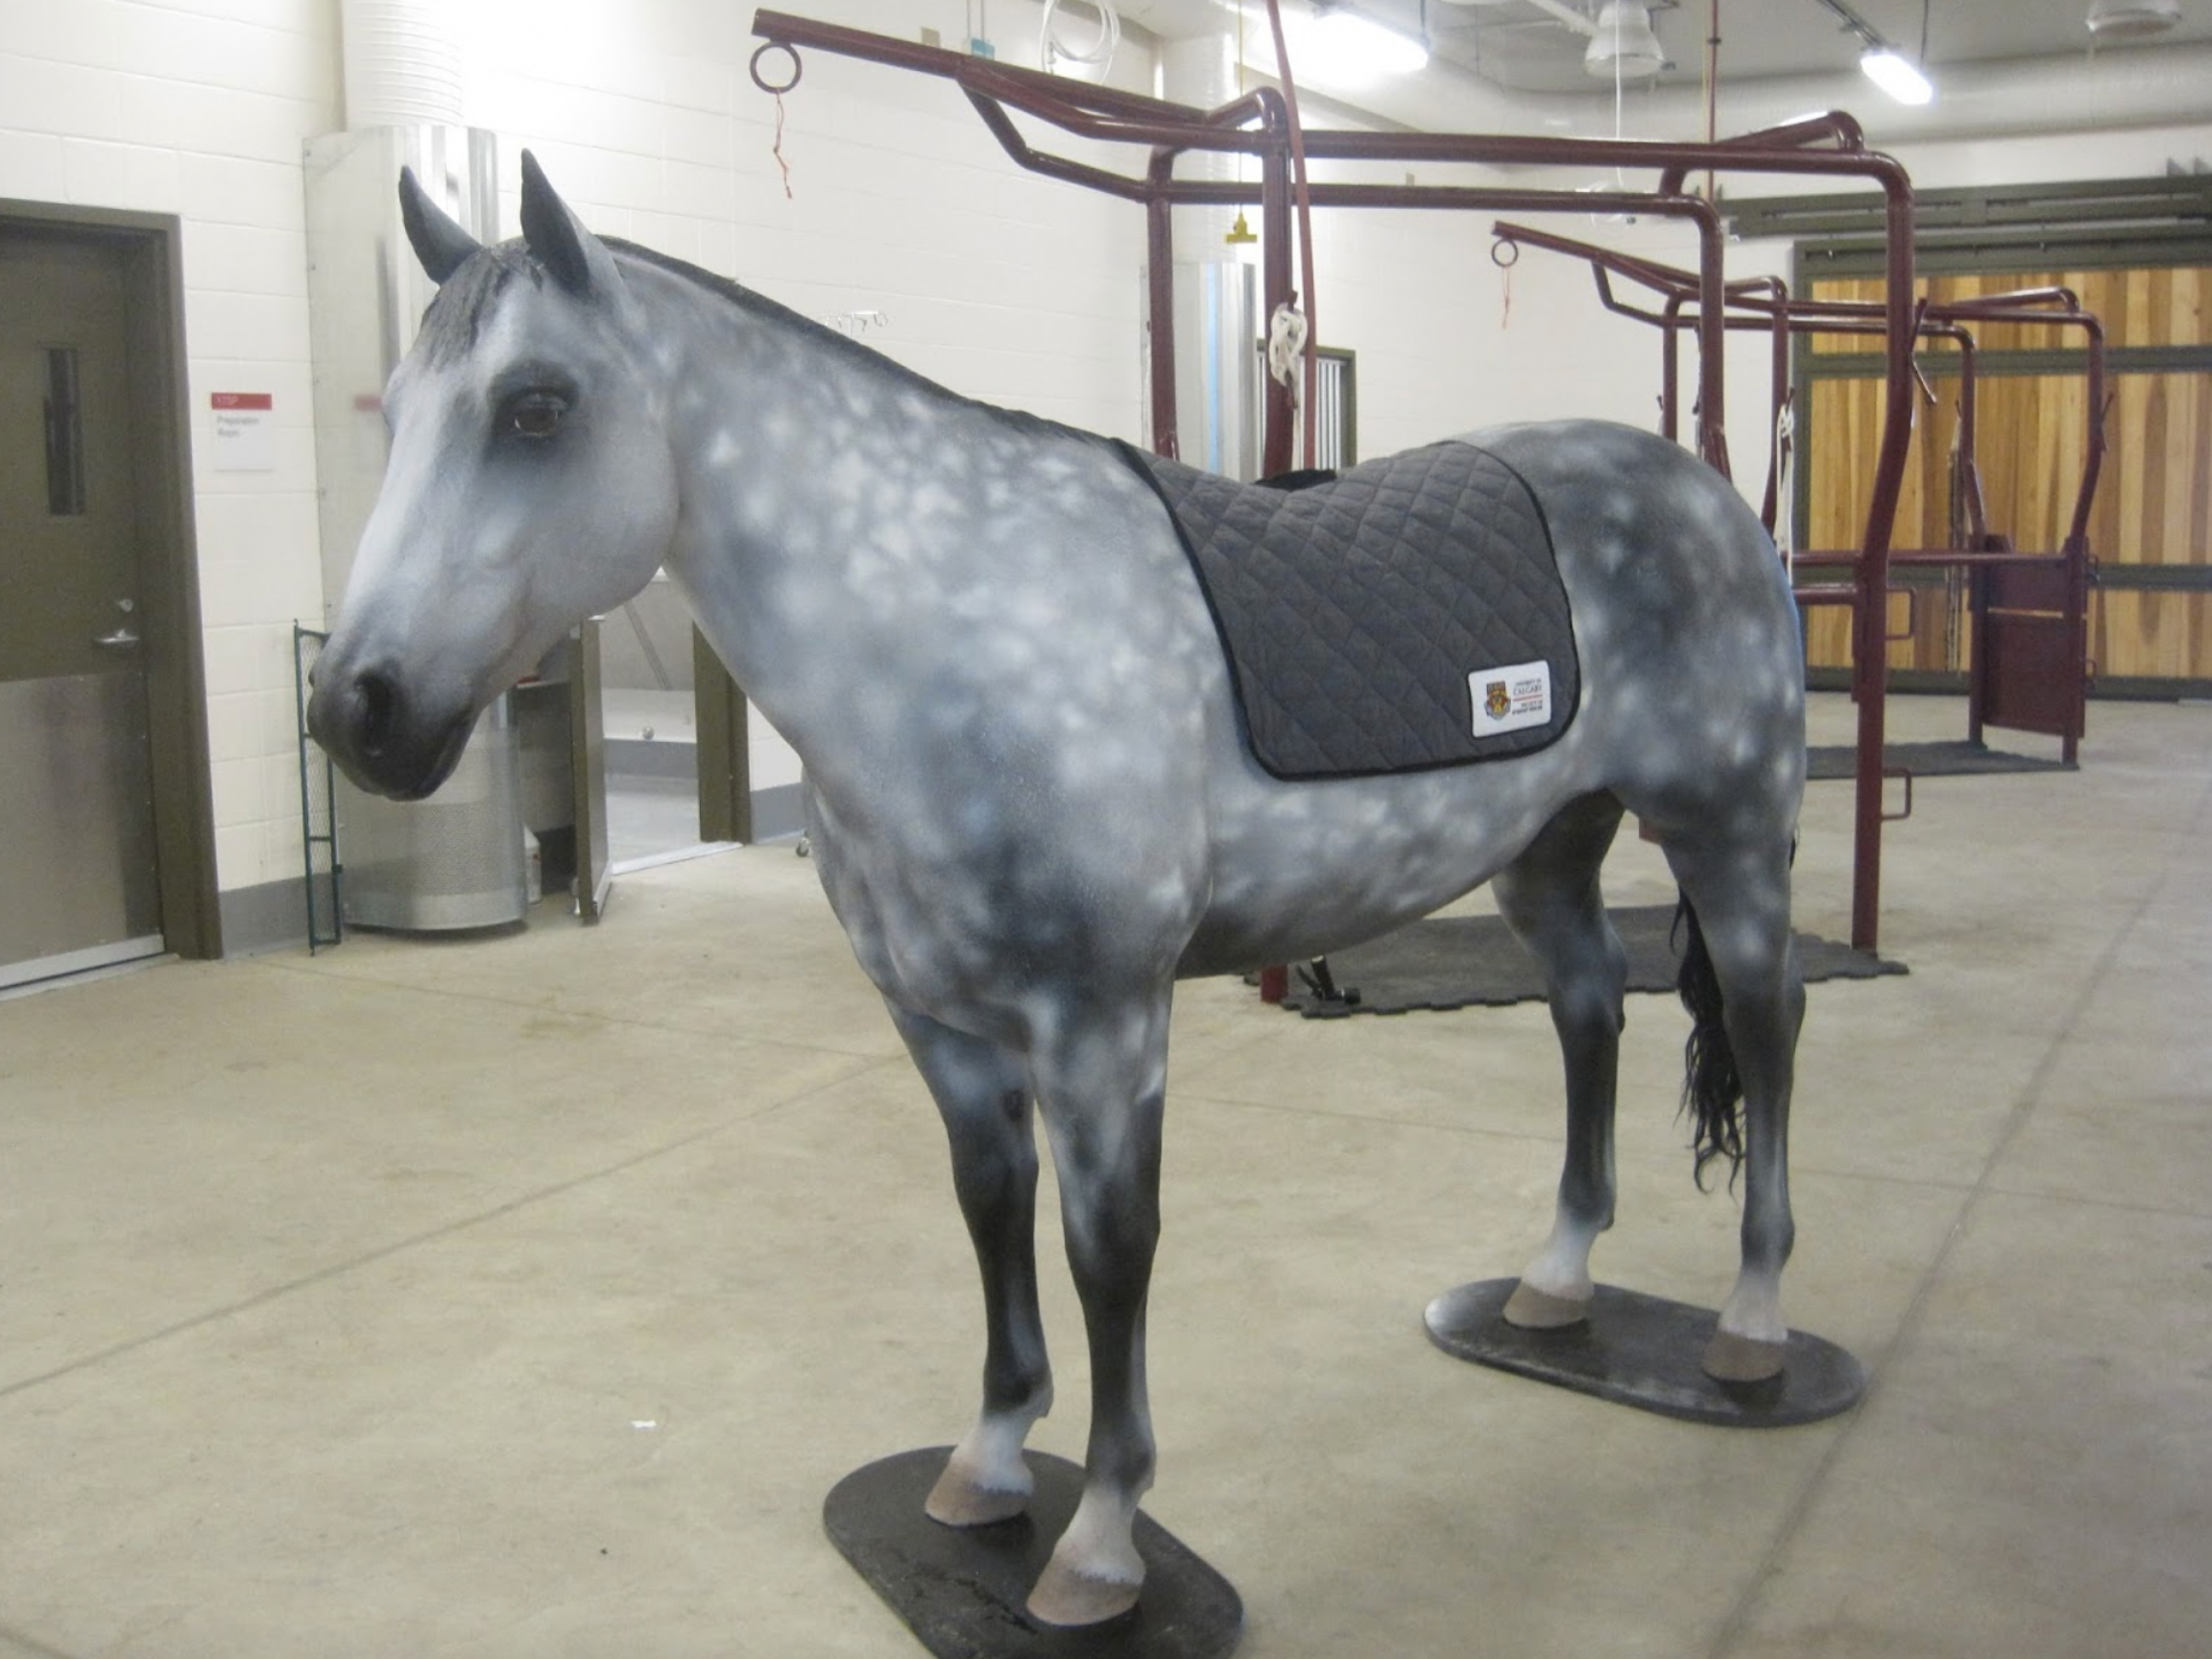  This is our new&nbsp;Quarter Horse model specially painted as a Dapple Gray breed for Dr. Emma Read of the University of Calgary Faculty of Veterinary Medicine. 